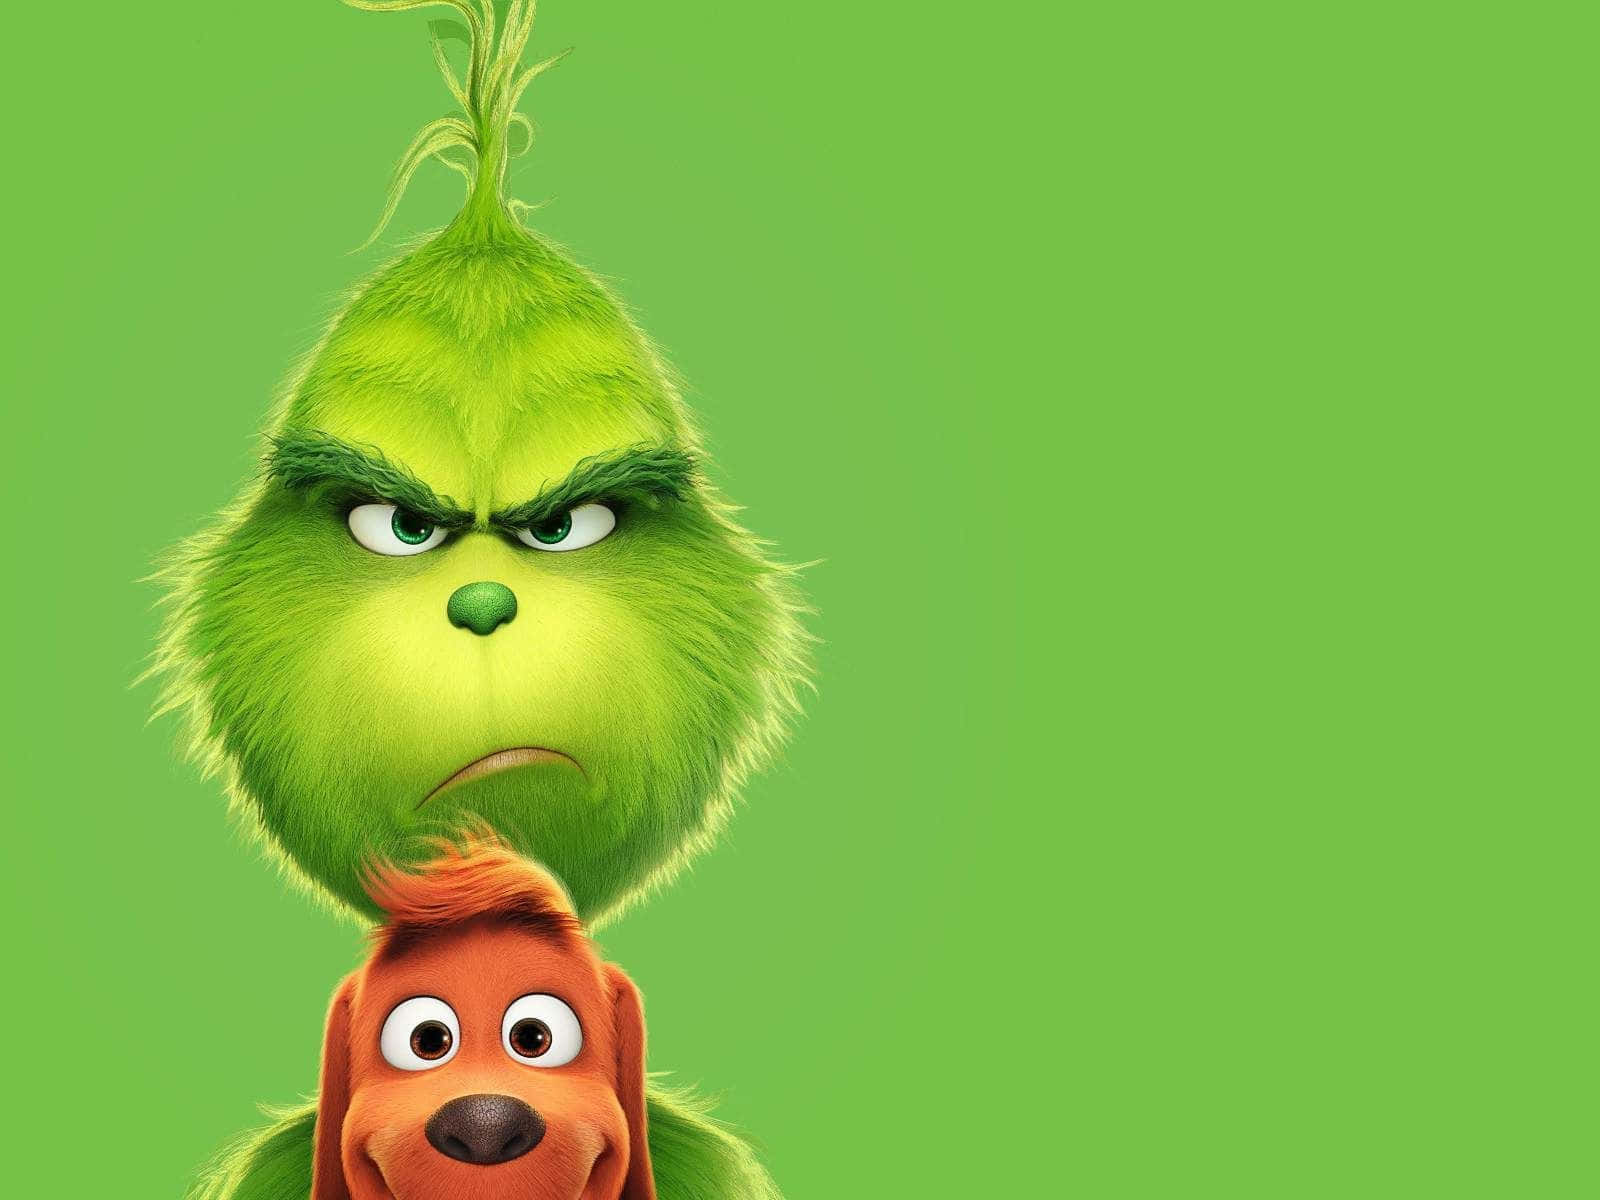 "You're a Mean One, Mr. Grinch!"